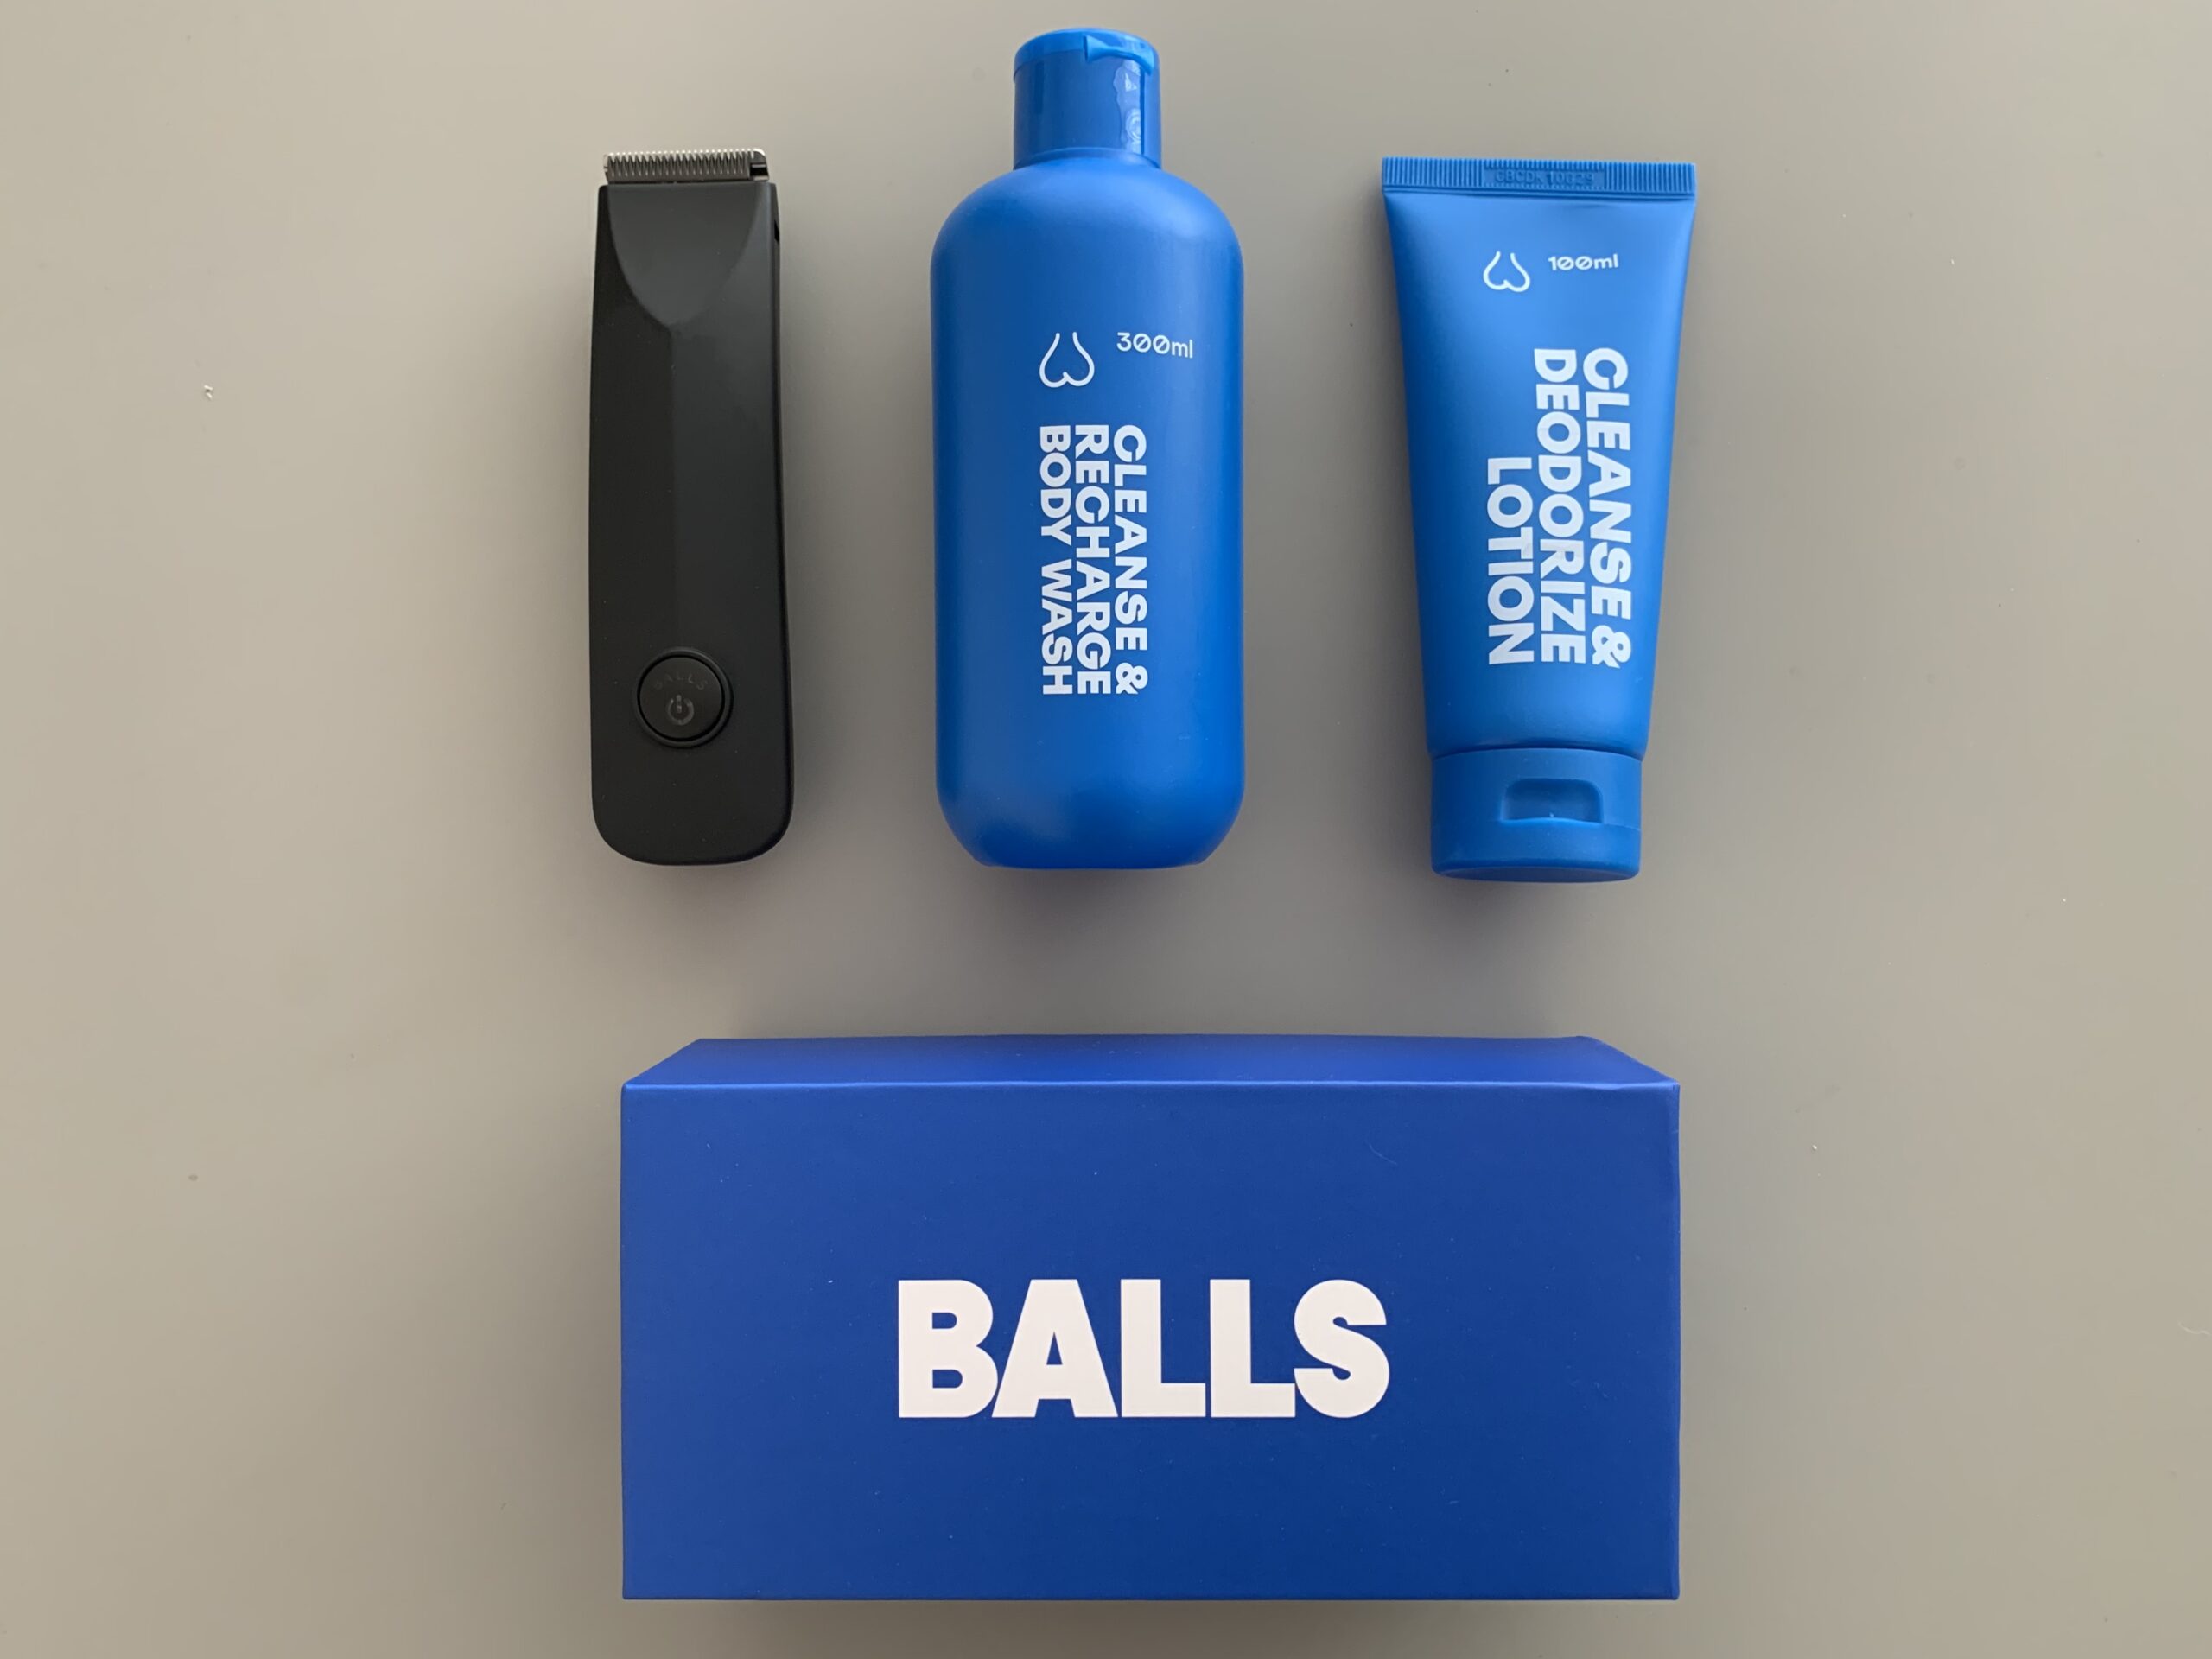  Christmas Gifts For Him: BALLS Cordless Trimmer £45